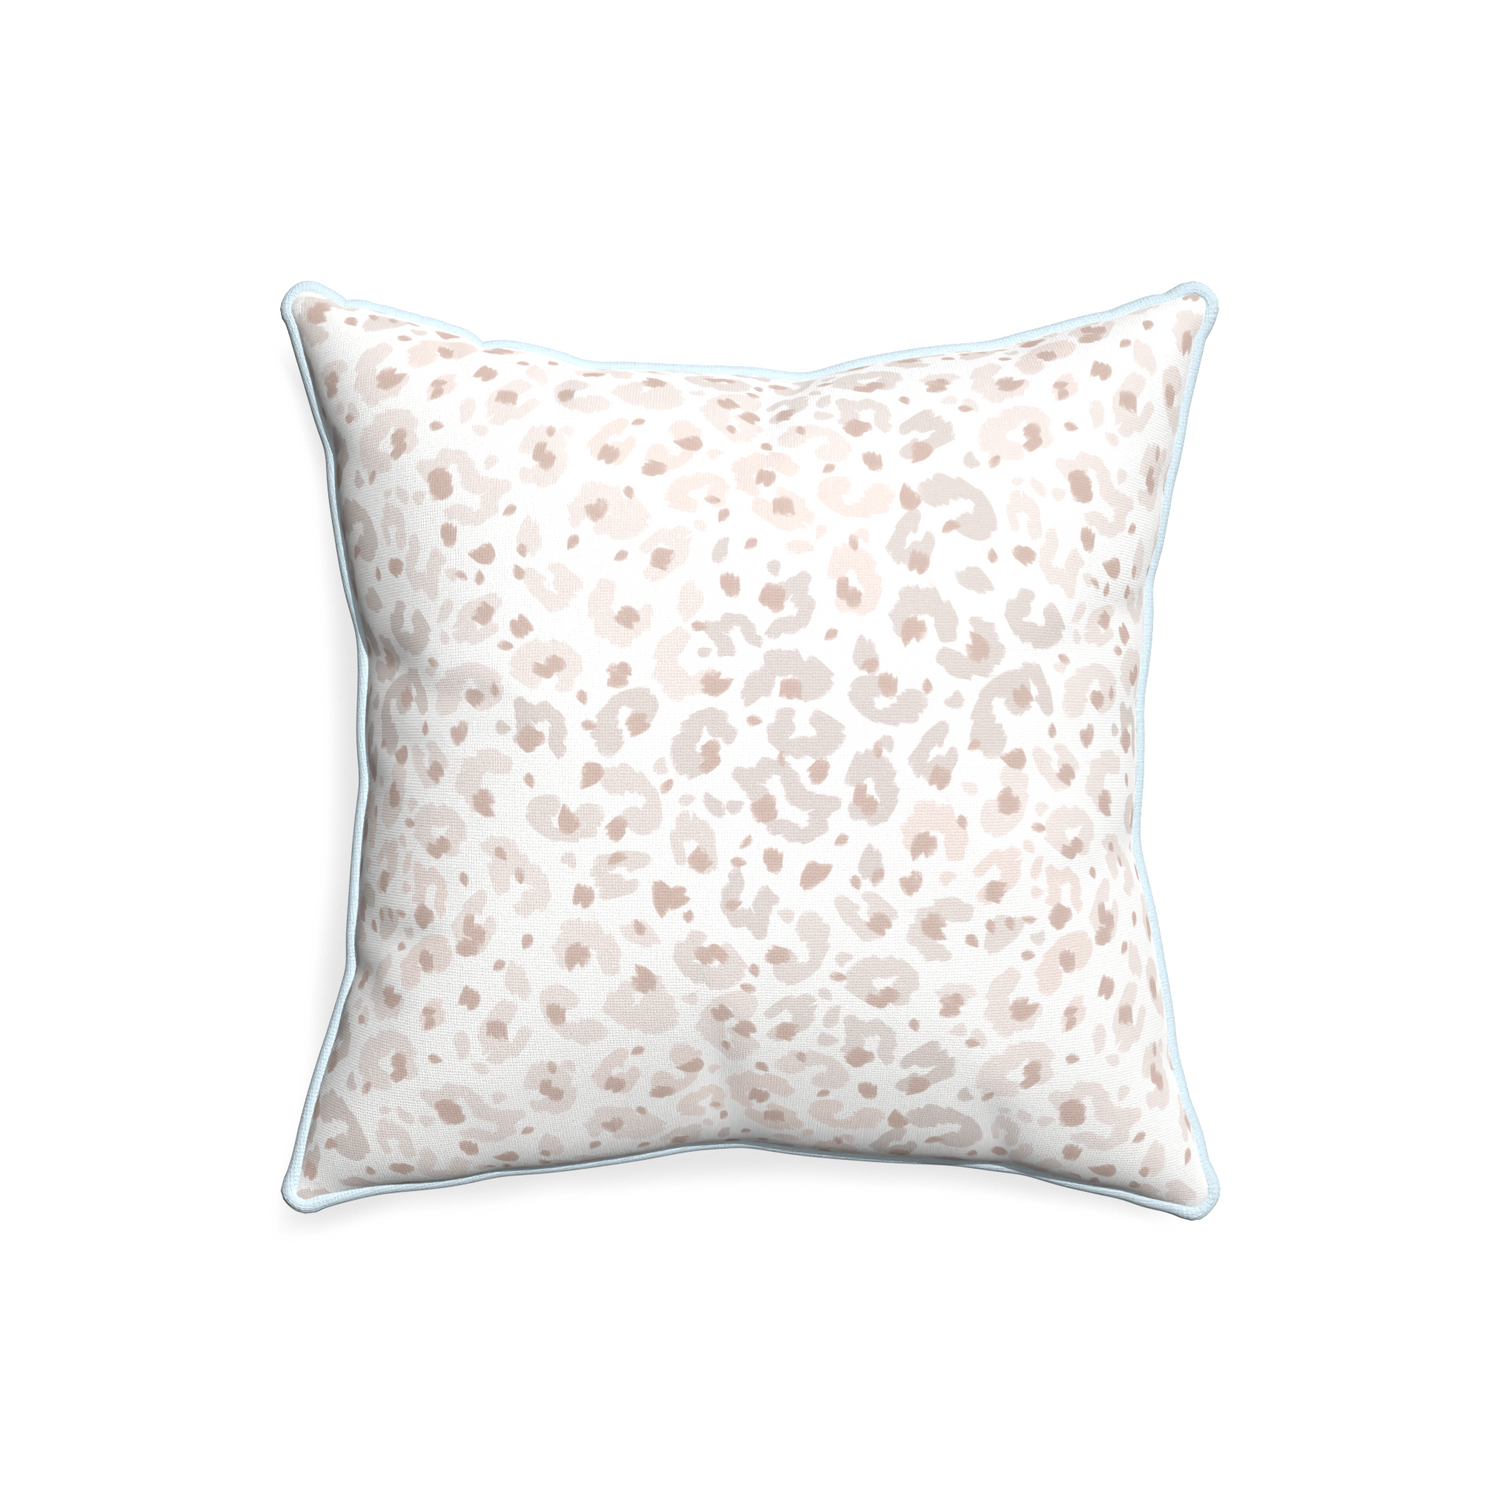 20-square rosie custom beige animal printpillow with powder piping on white background